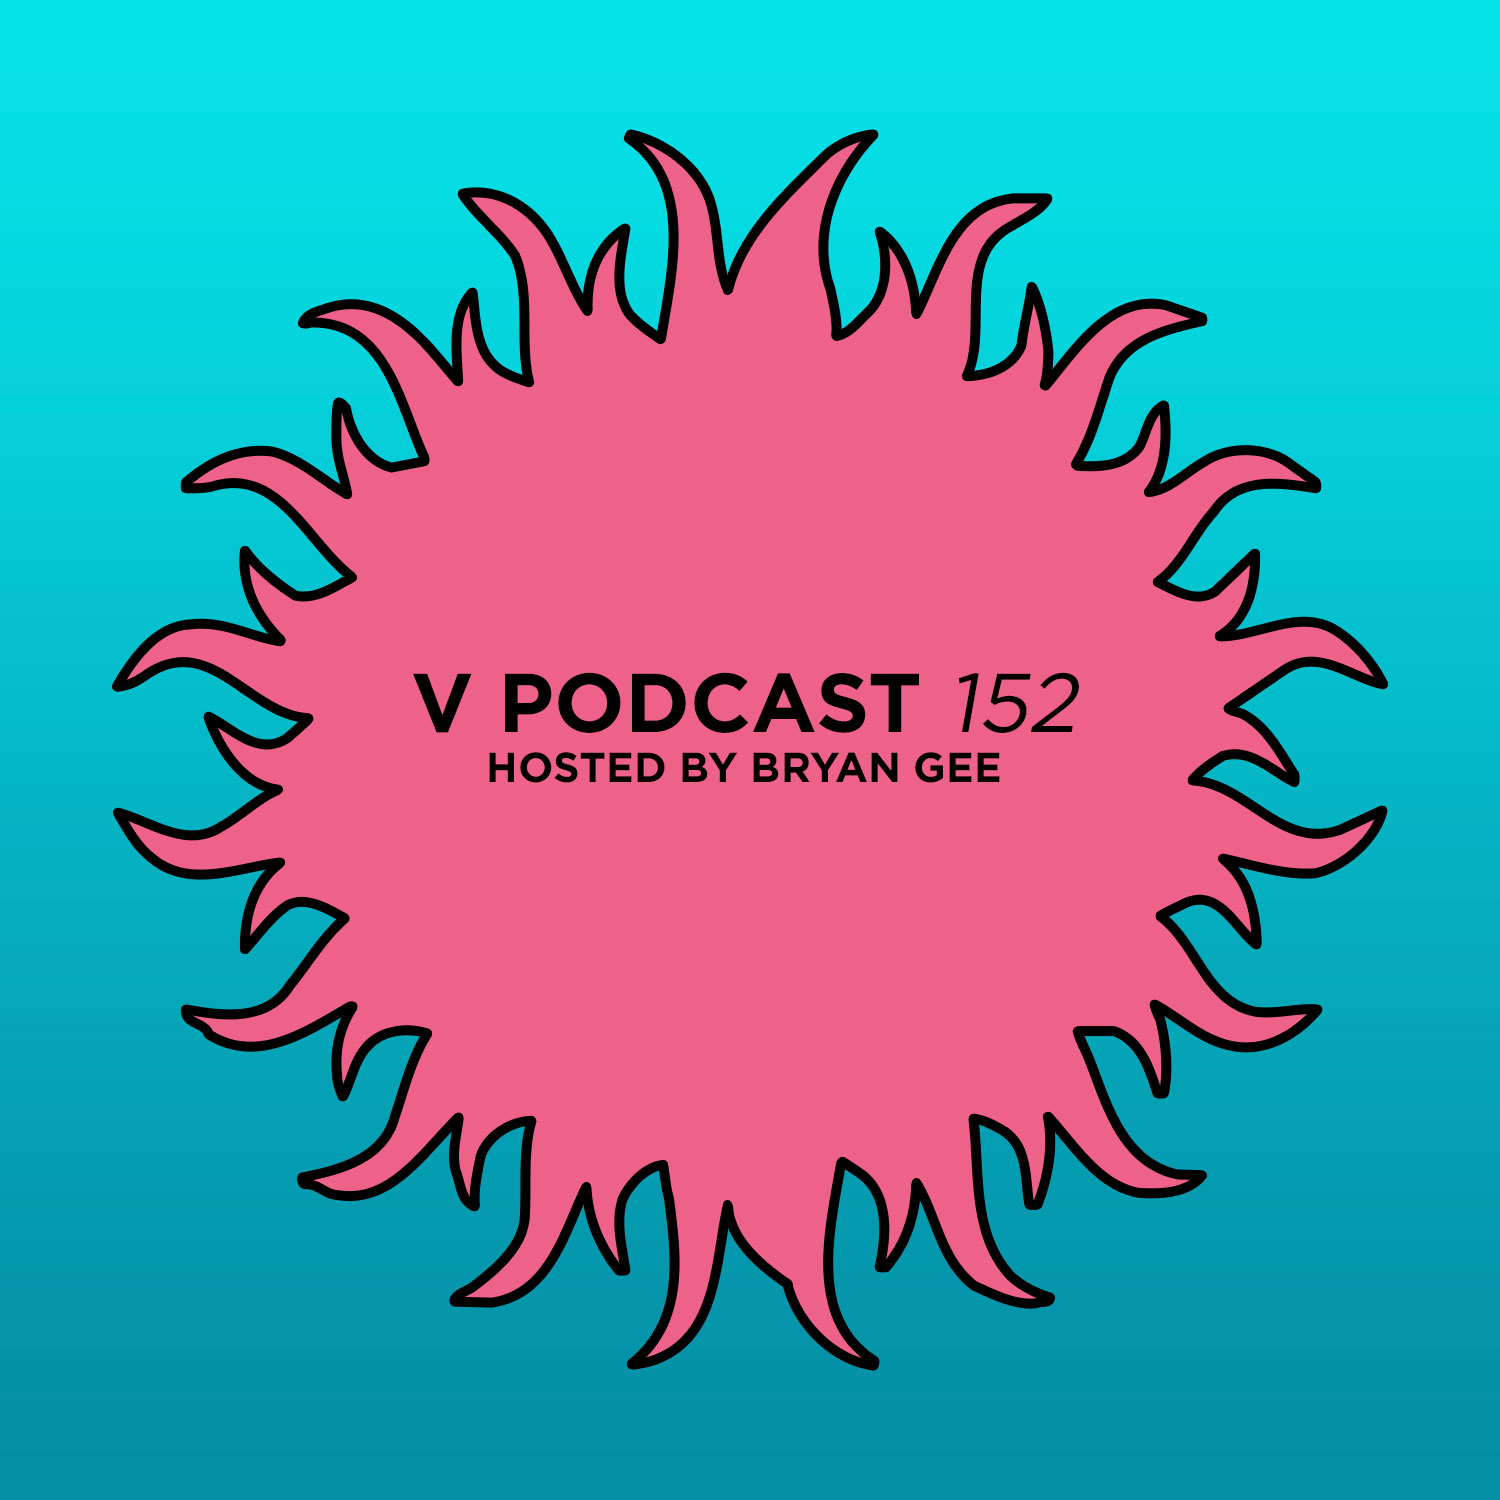 V Podcast 152 - Hosted by Bryan Gee Artwork